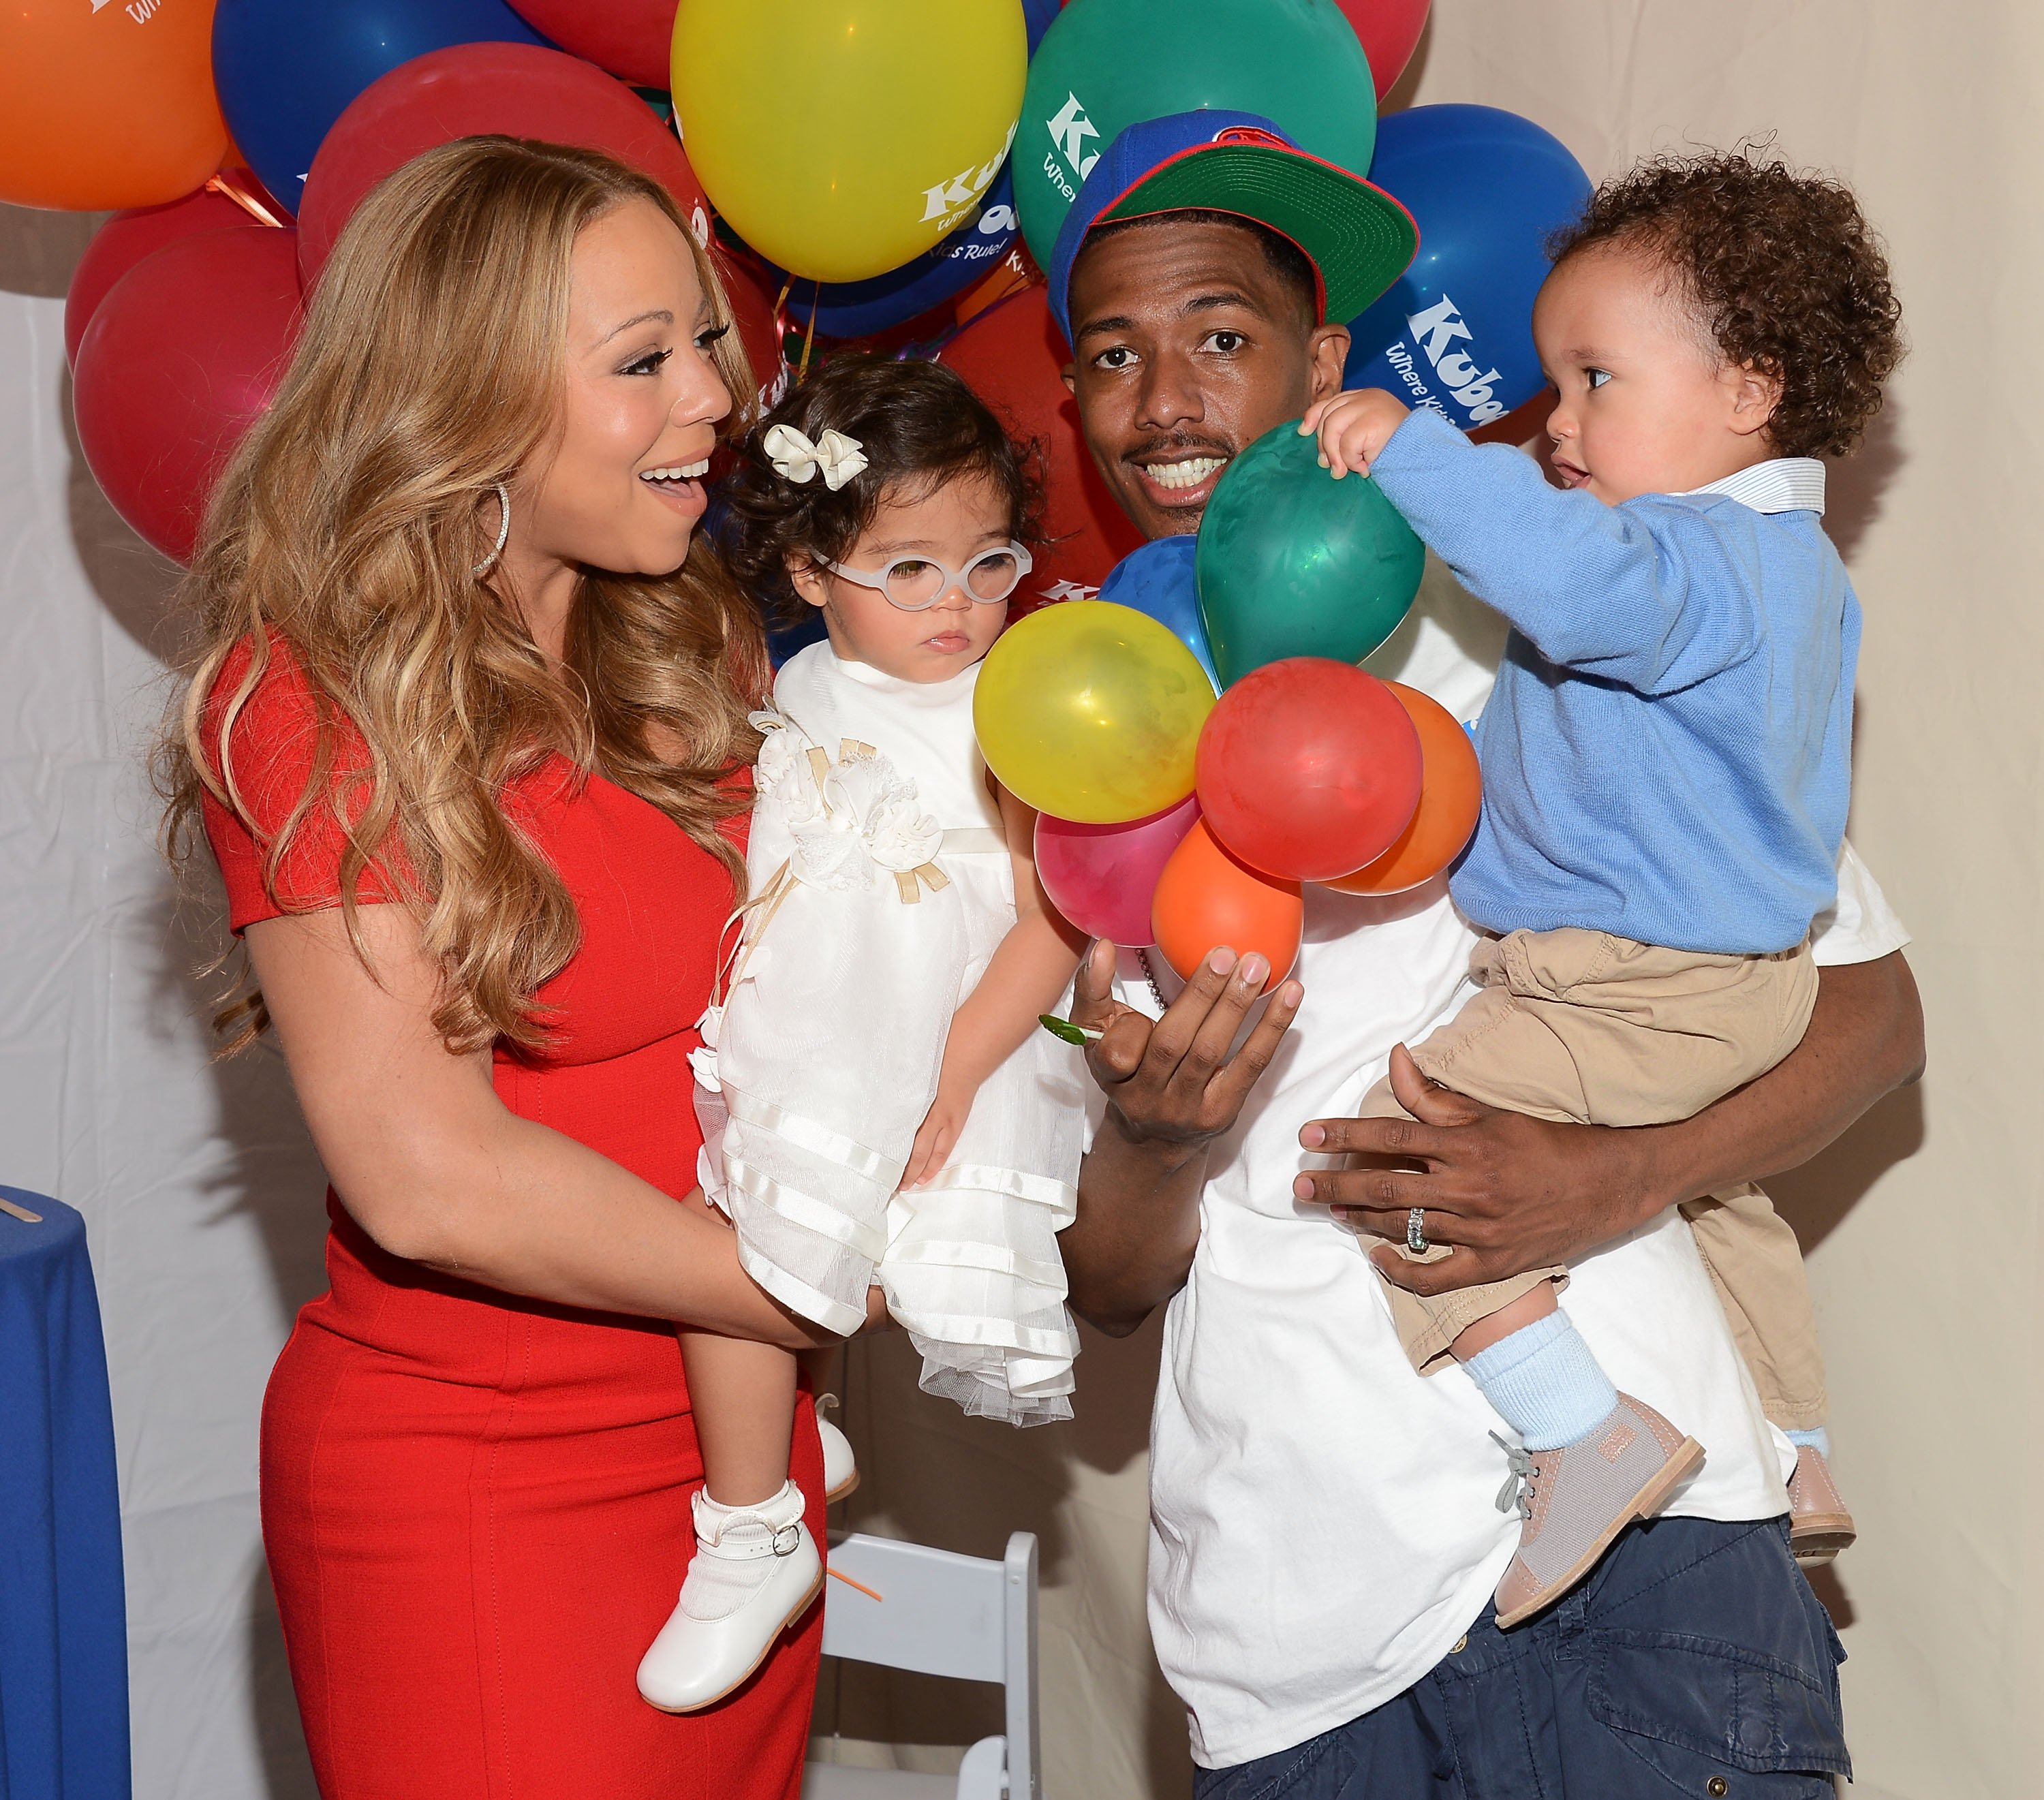 Recording artist Mariah Carey, Nick Cannon and their children Monroe Cannon (L) and Moroccan Cannon attend "Family Day" hosted by Nick Cannon at Santa Monica Pier on October 6, 2012 | Source: Getty Images 